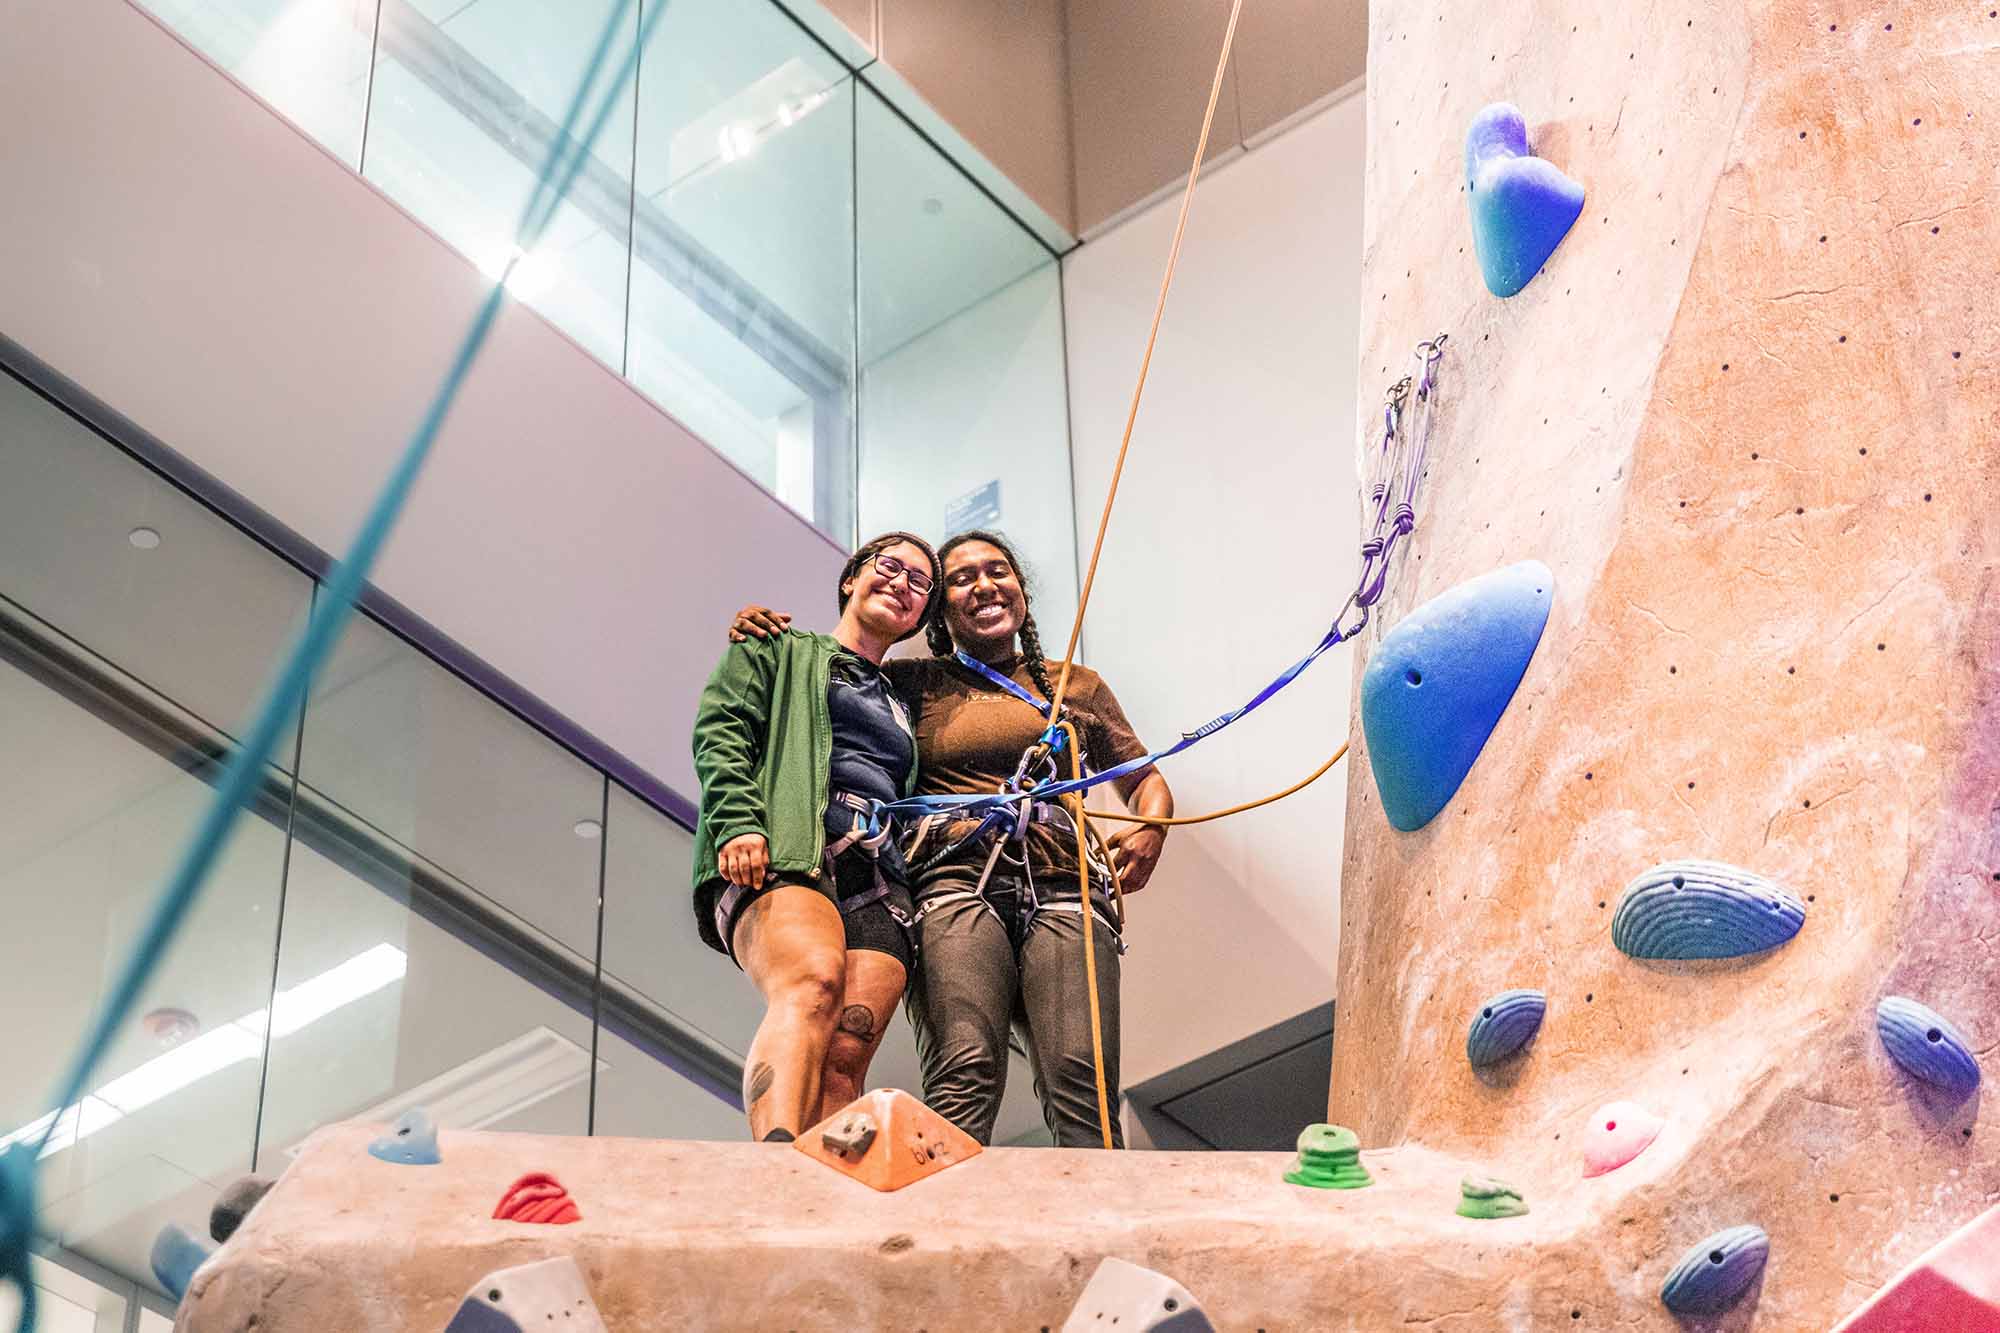 Two climbers are smiling and posing at the top of an indoor climbing wall